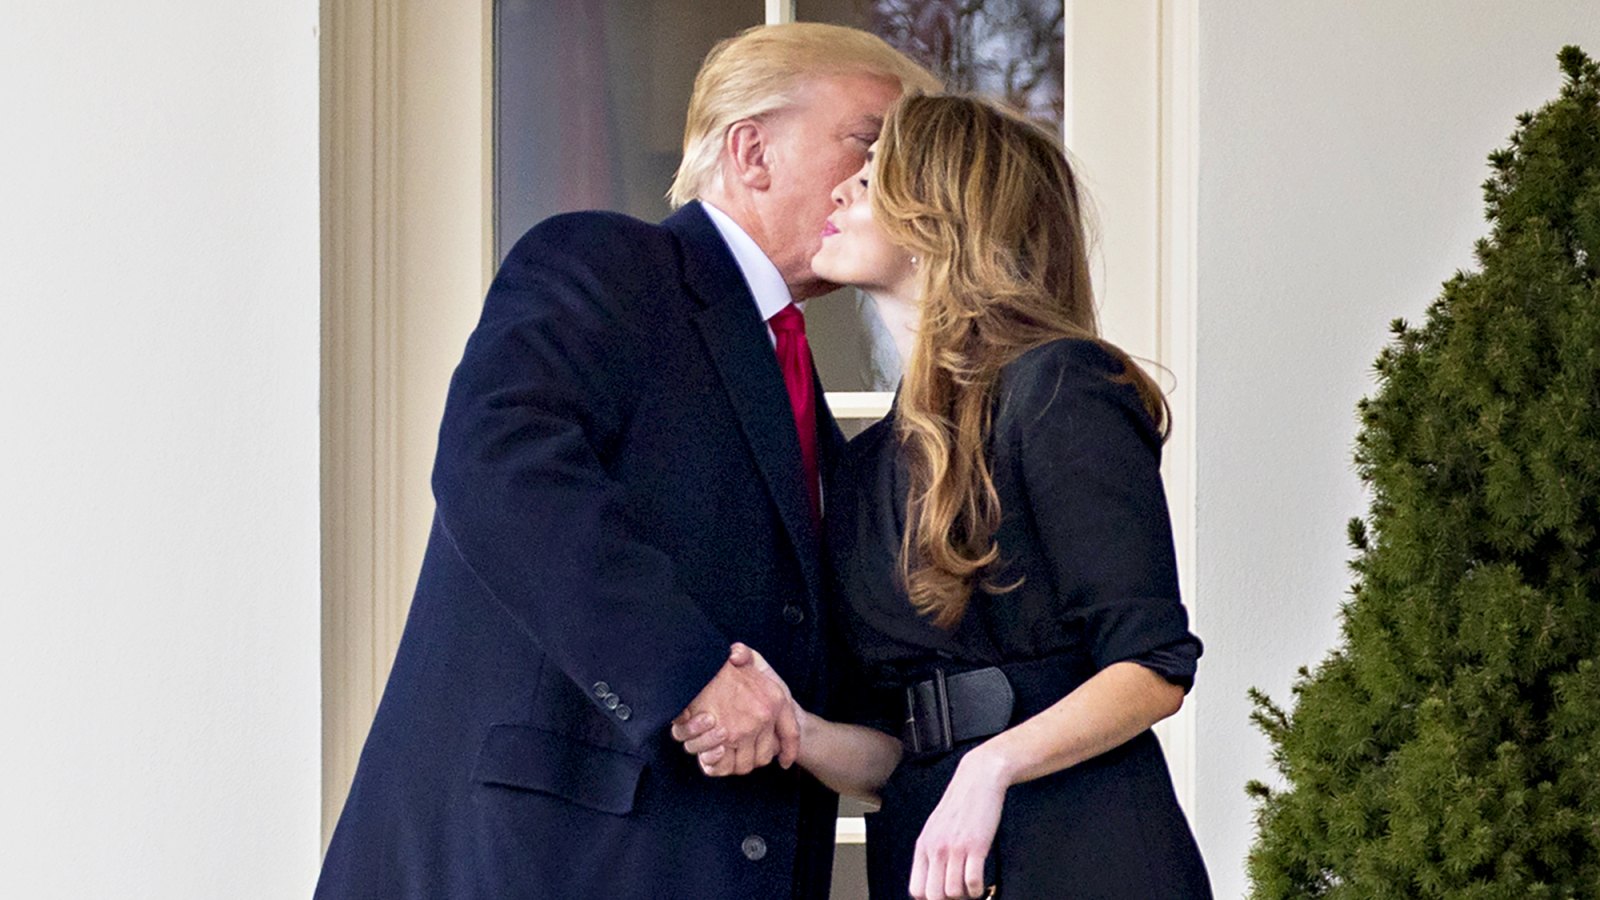 Donald Trump and Hope Hicks outside the Oval Office of the White House in Washington, D.C. on March 29, 2018.